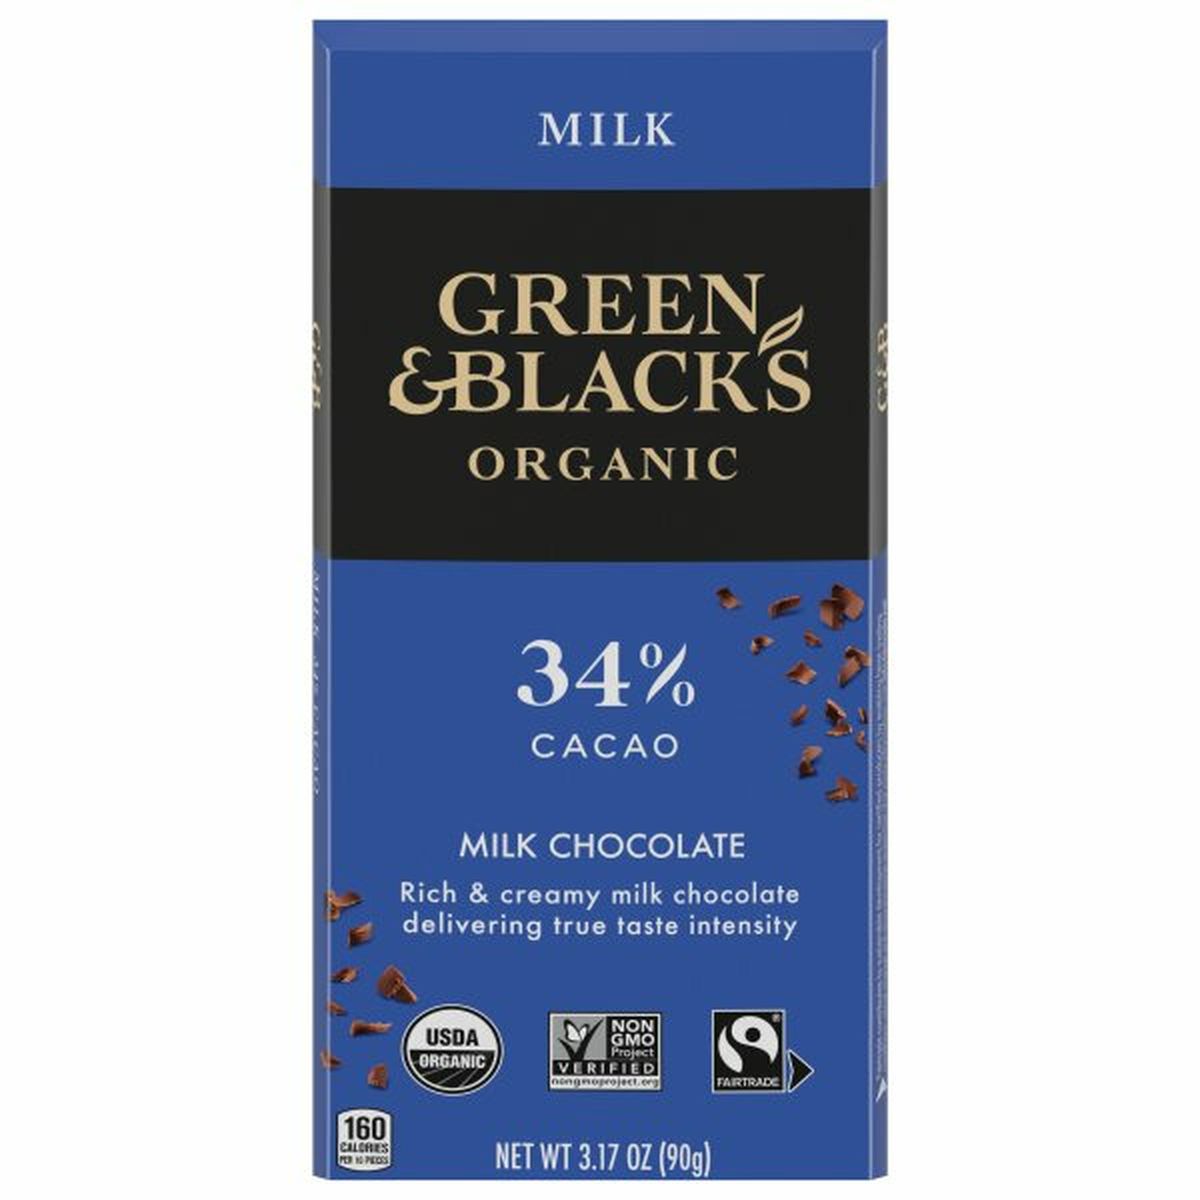 Calories in Green & Black's Milk Chocolate, Organic, 34% Cacao